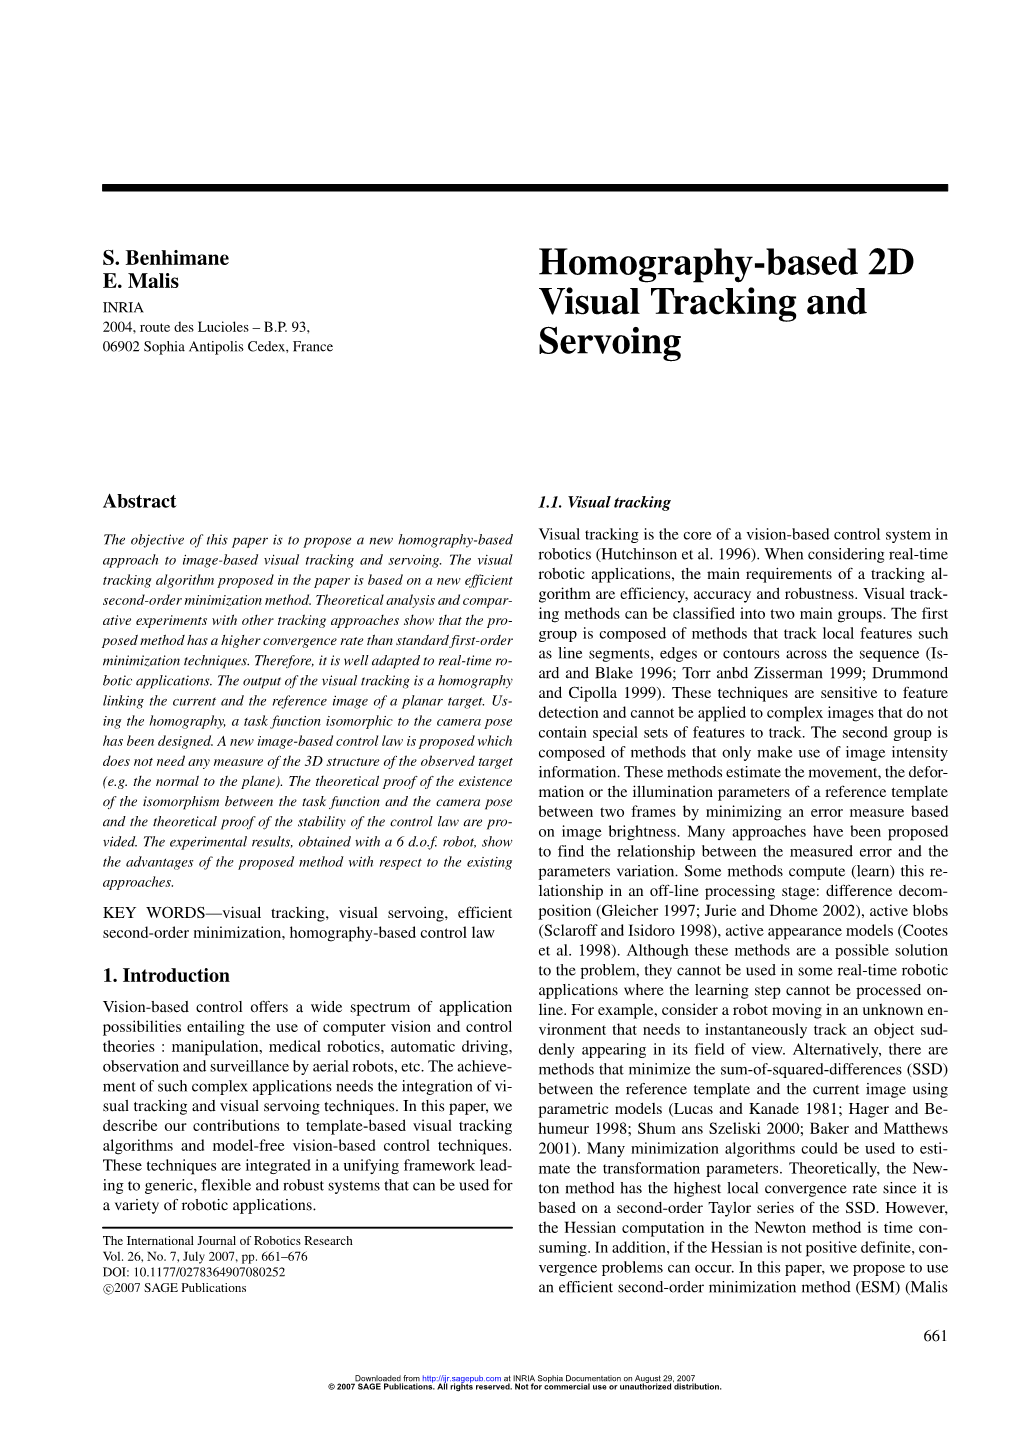 Homography-Based 2D Visual Tracking and Servoing 663